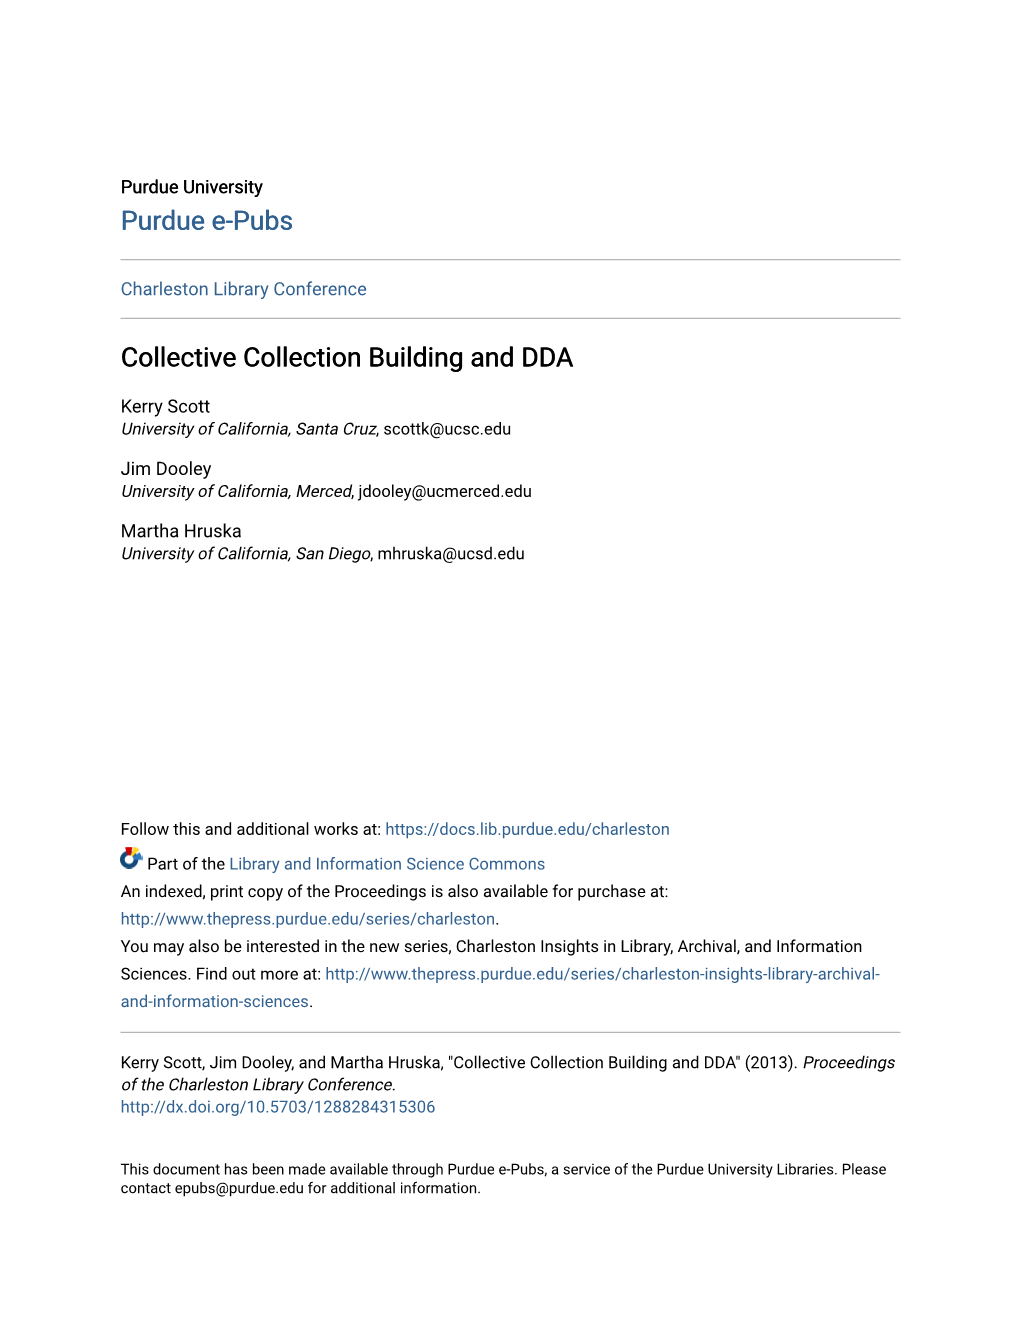 Collective Collection Building and DDA